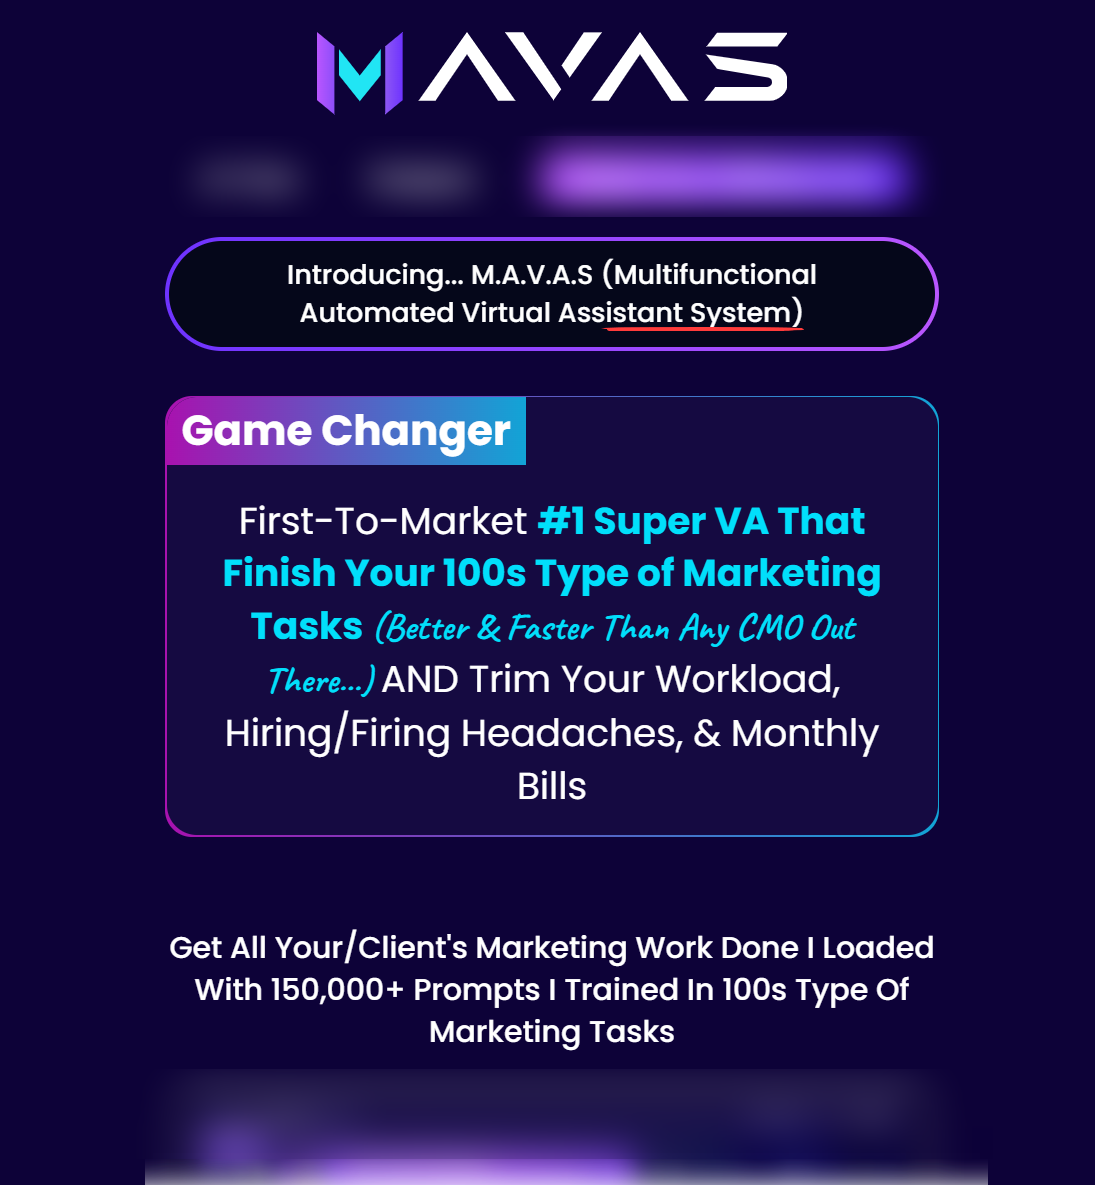 MAVAS JV MAVAS Review: This Is A Super VA That Finish 100s of Marketing Tasks (Better and faster Than Any CMO Out There) and Trim Your Workload, Hiring/Firing Headaches, and Monthly Bills